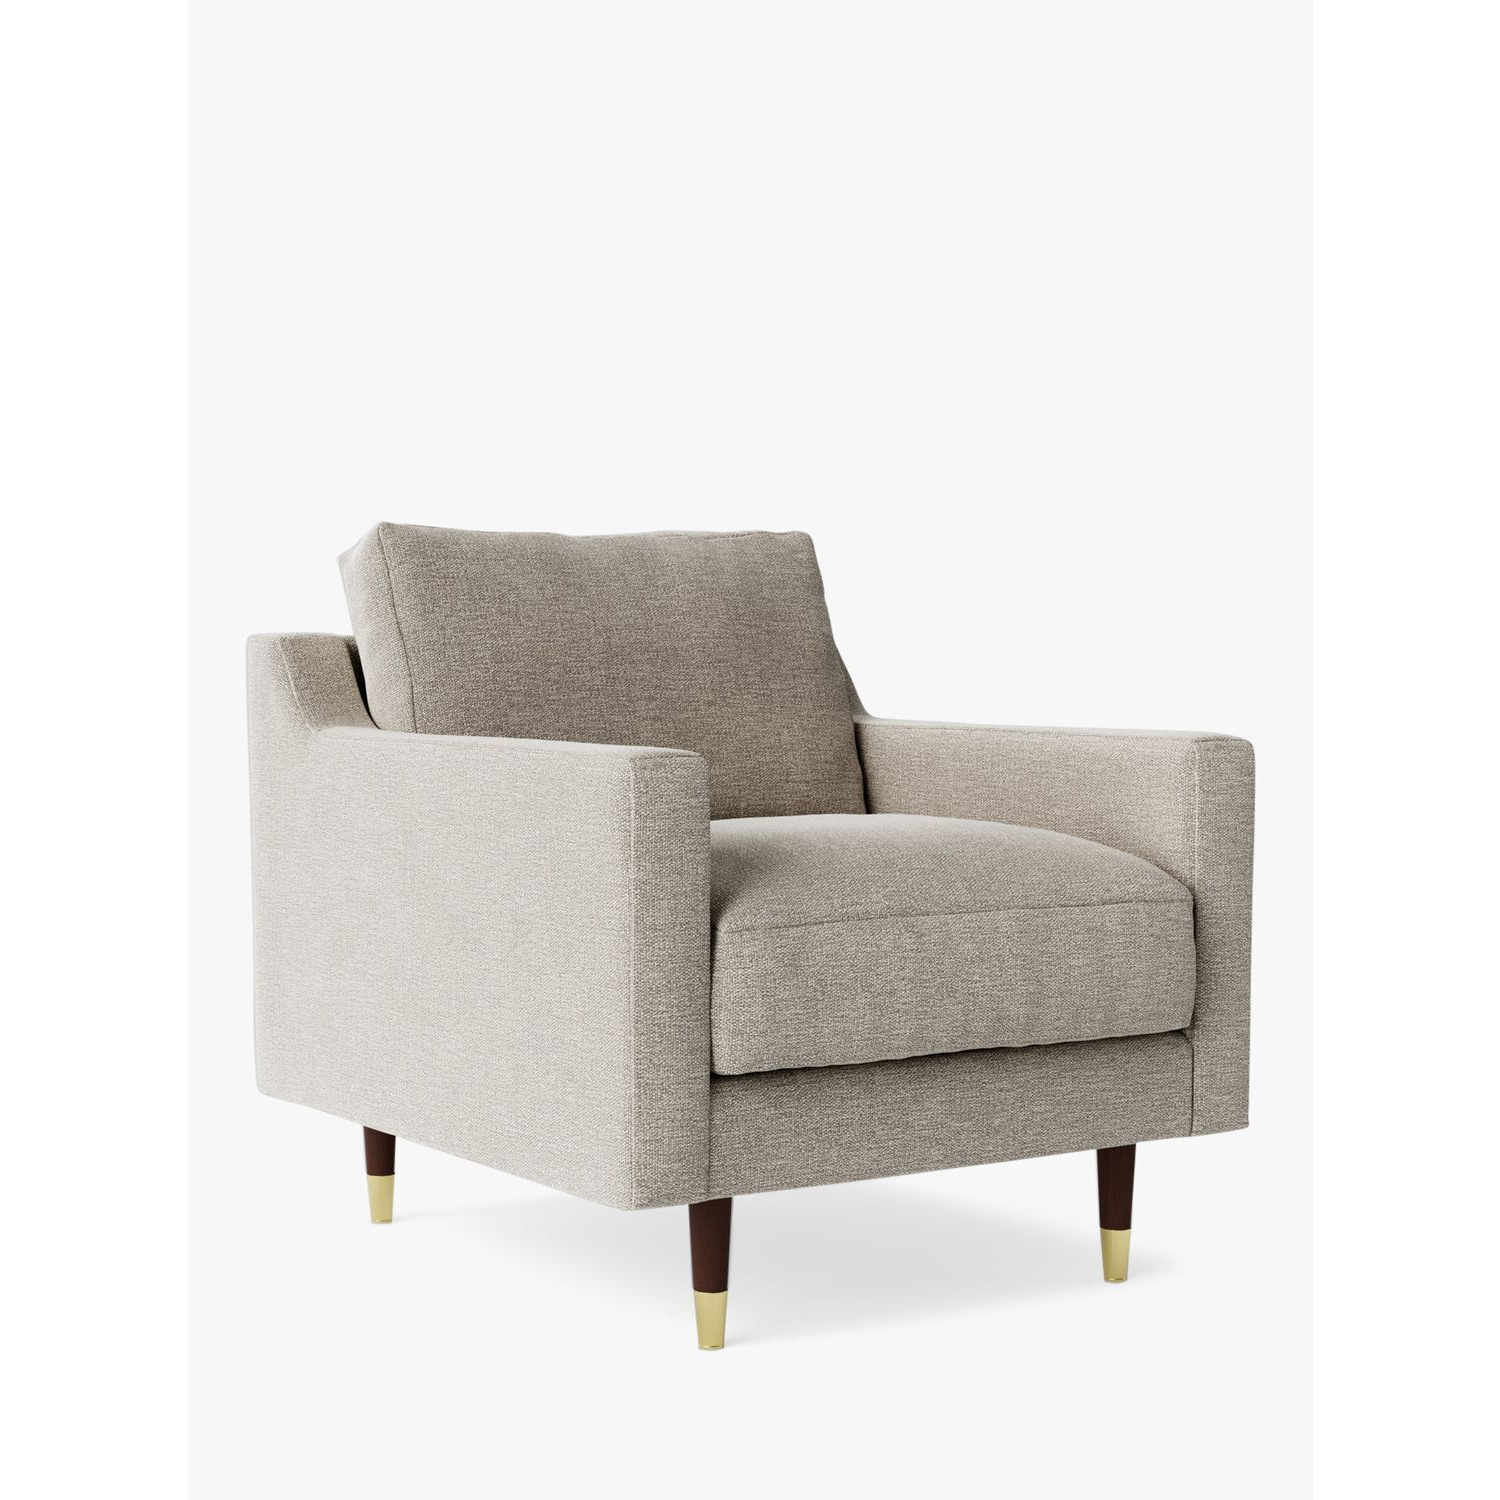 Swoon Rieti Armchair - image 1